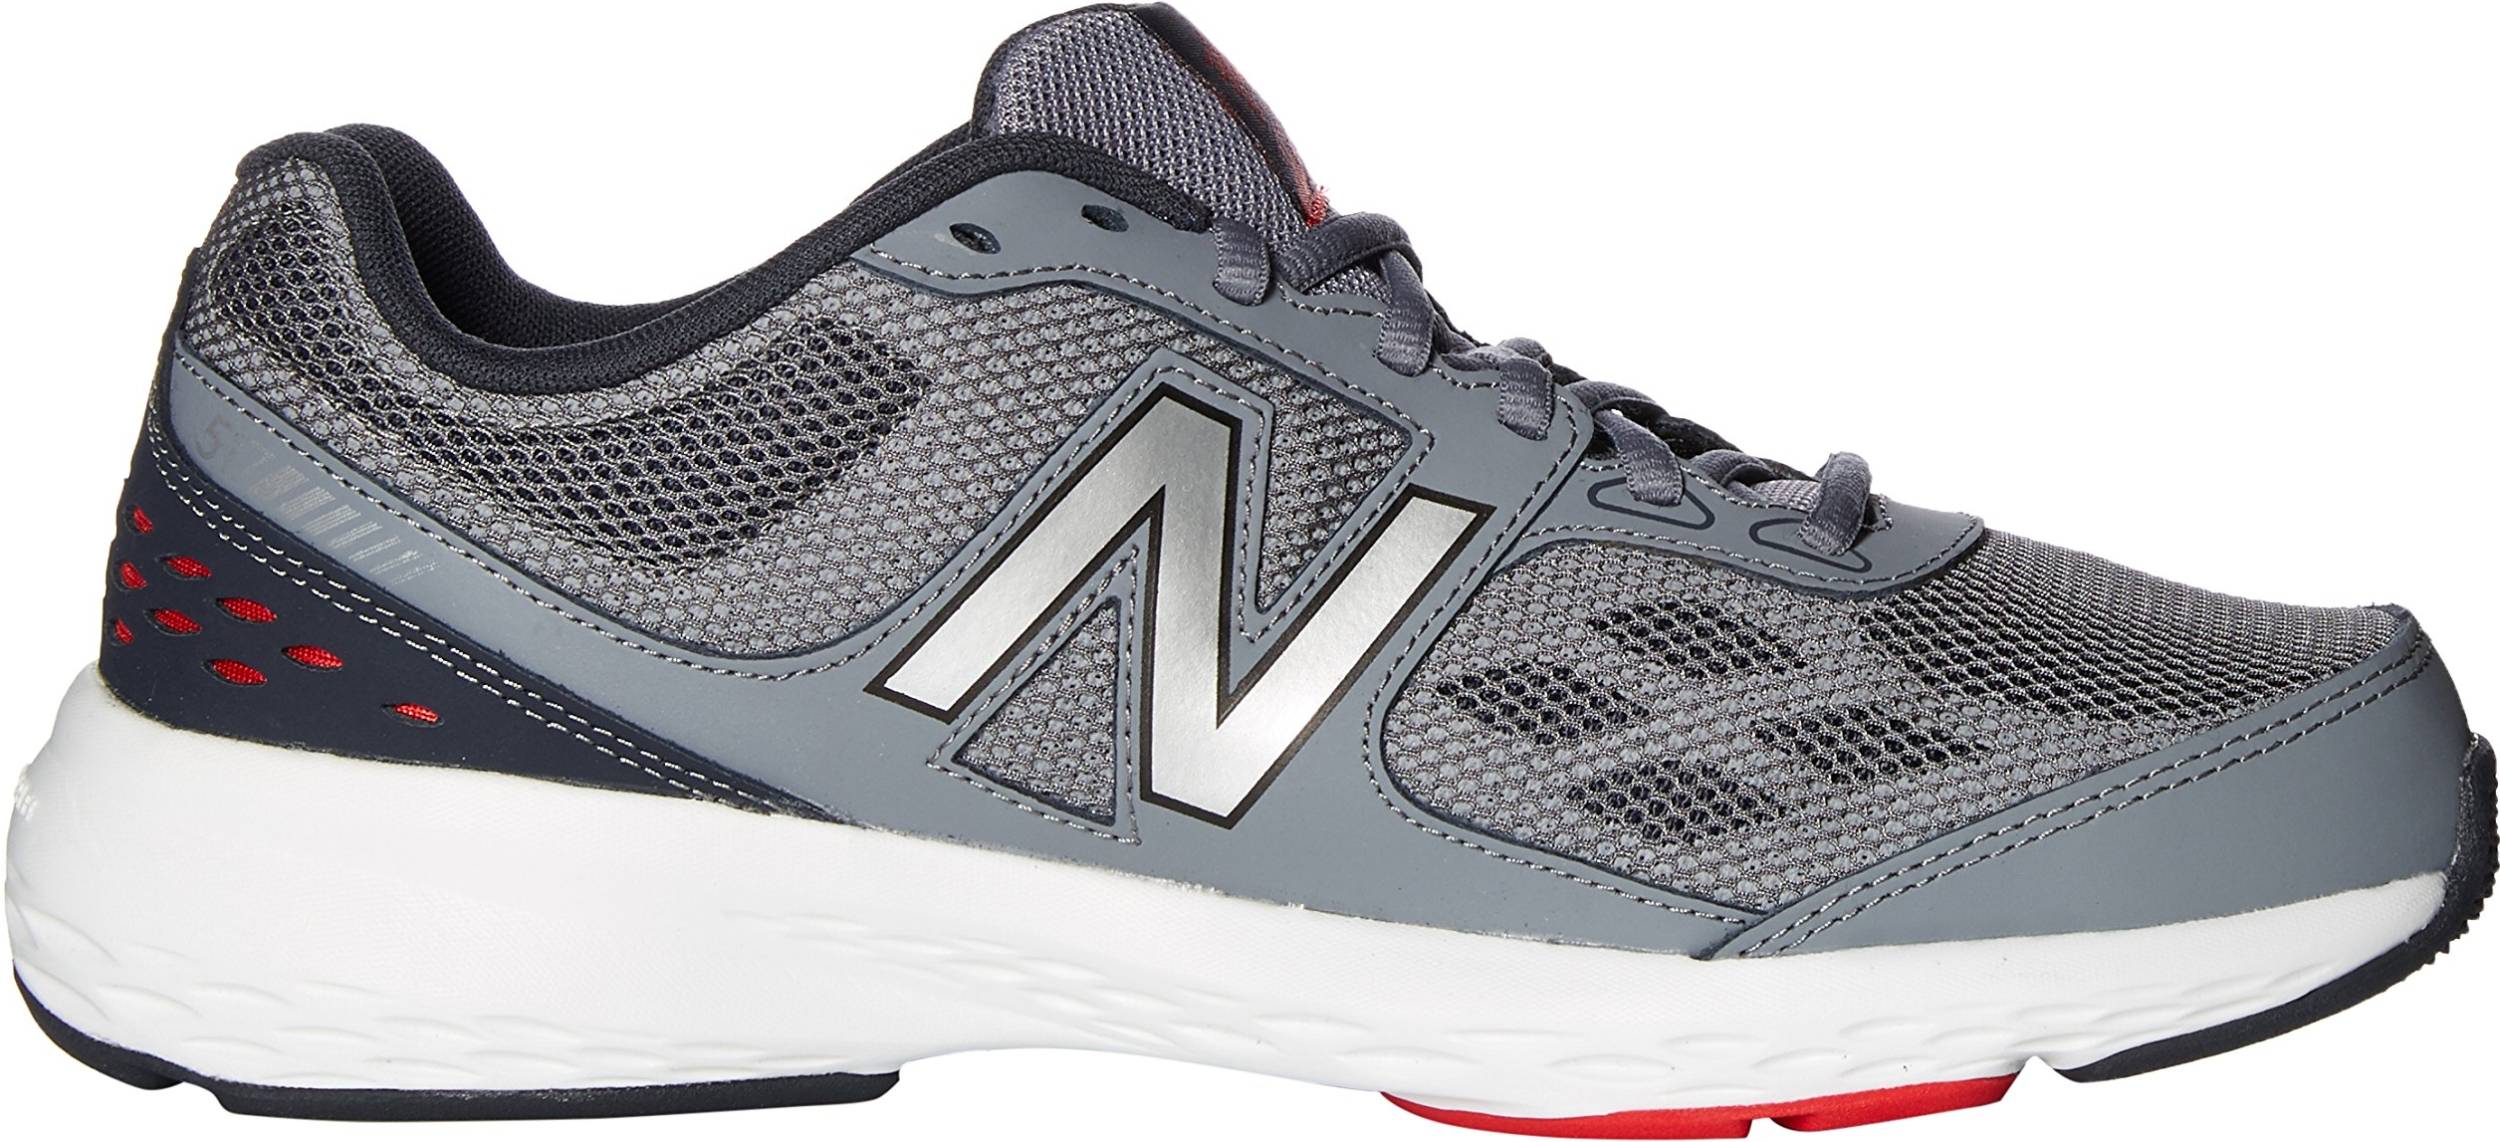 Only $50 + Review of New Balance 517 